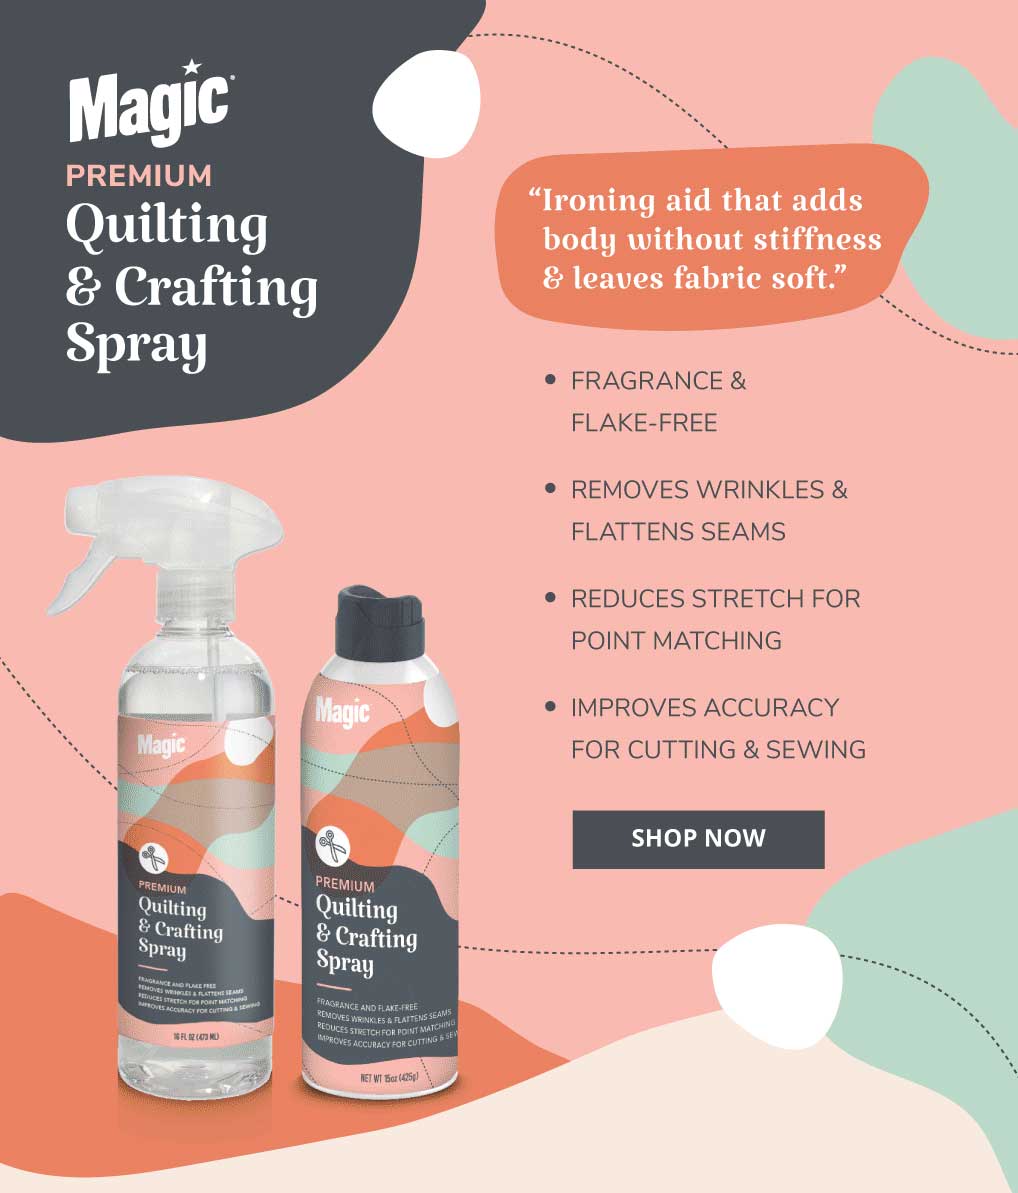 Magic Quilting and Crafting Spray Buy Now